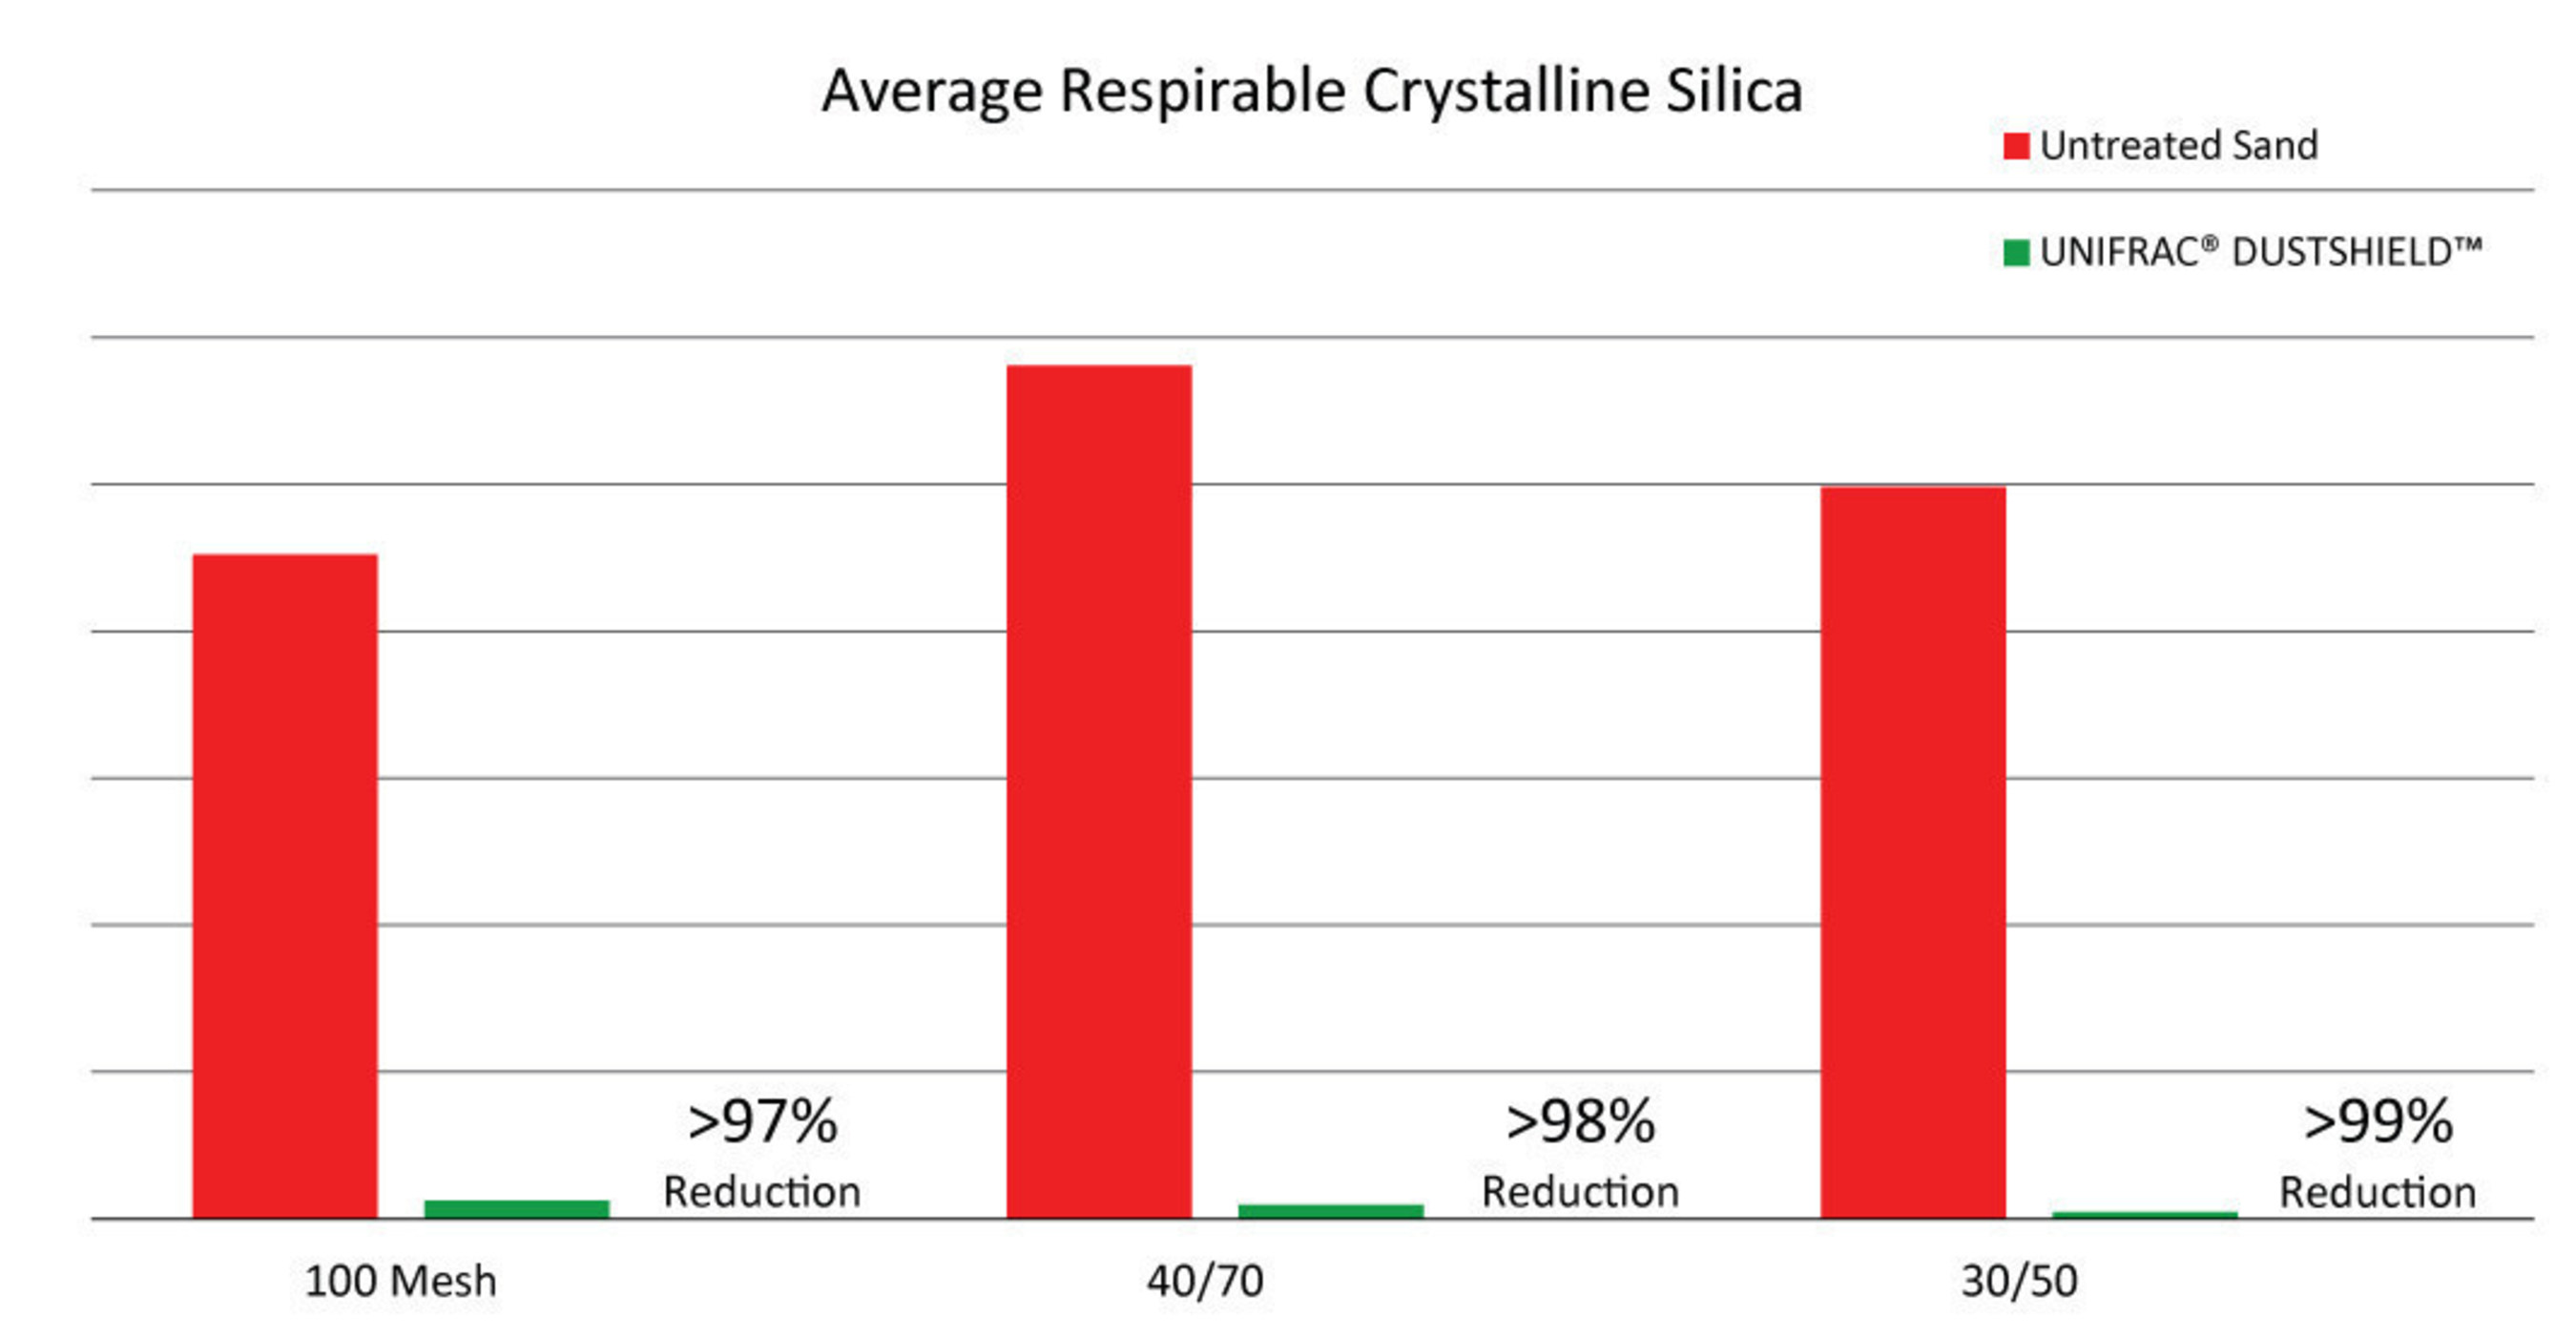 Average respirable silica reduction with UNIFRAC(R) DUSTSHIELD(TM) proppants.